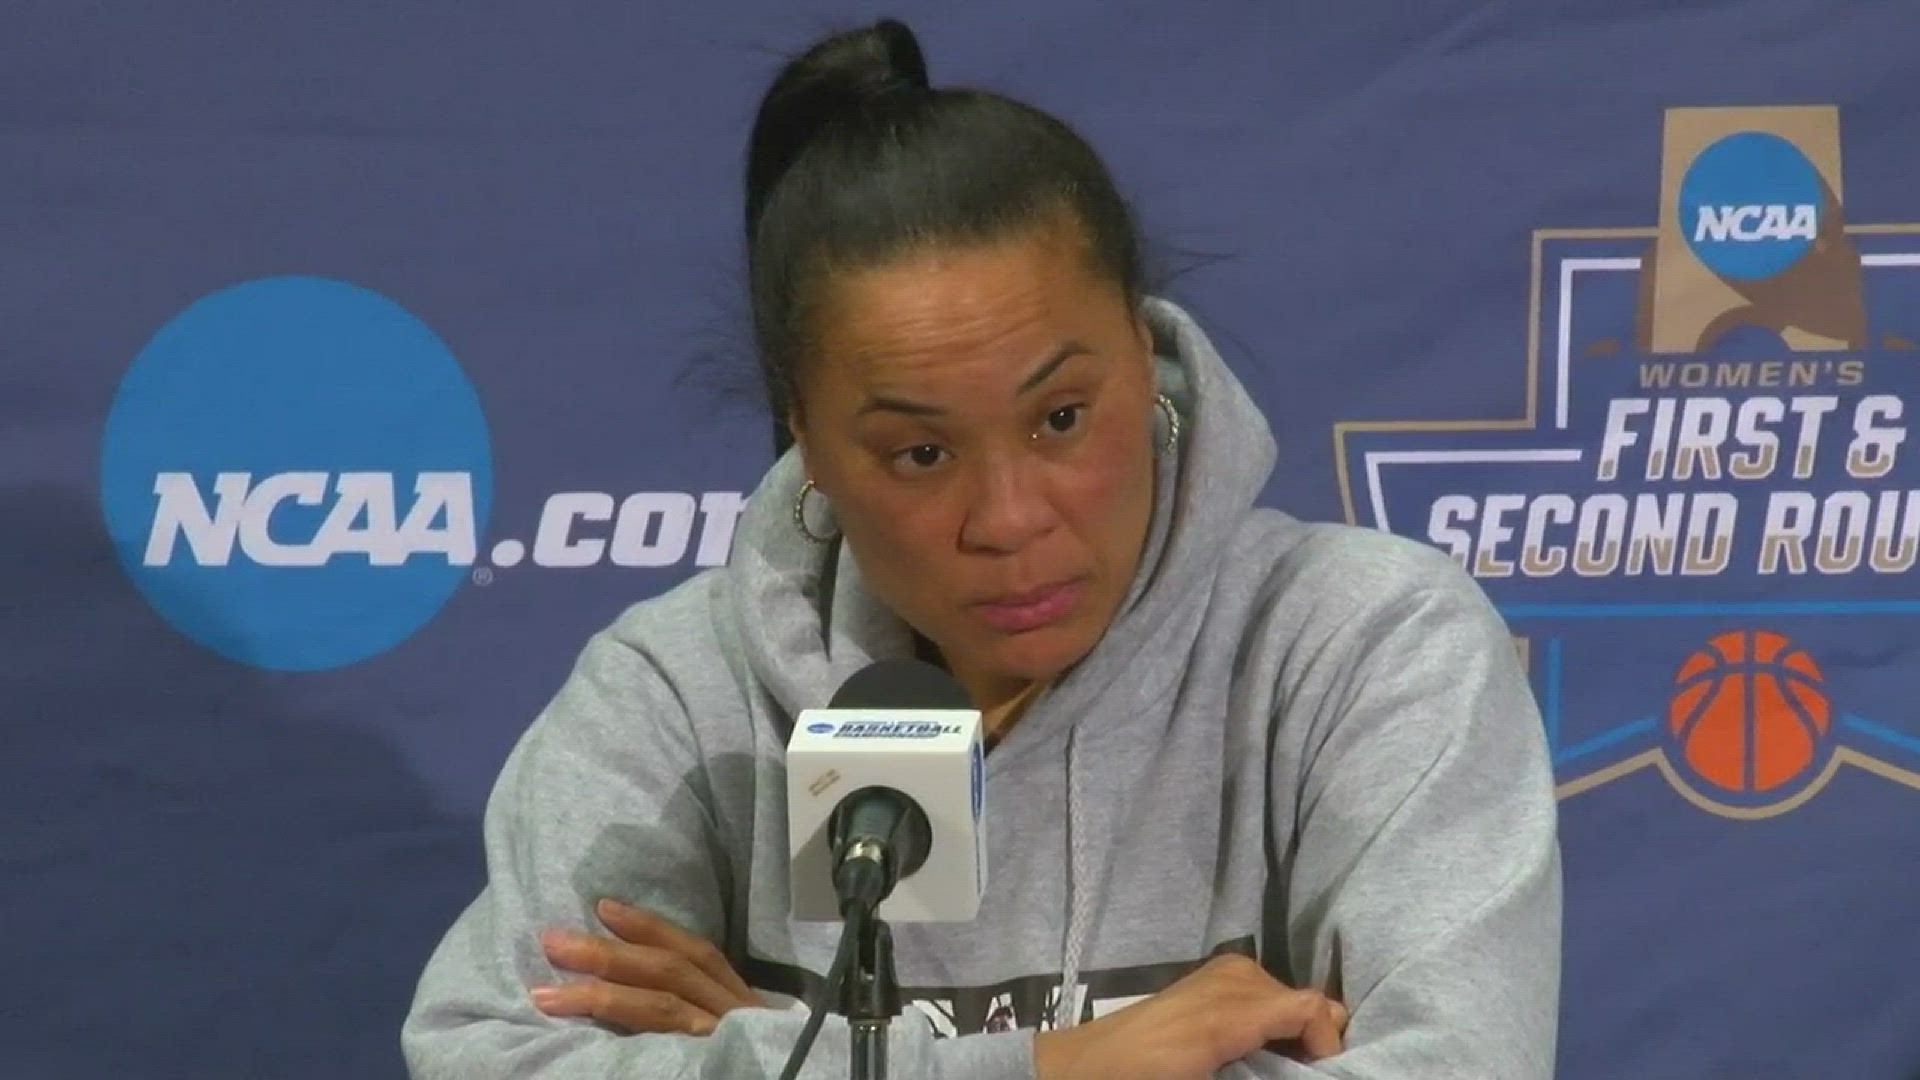 The Gamecocks will be facing their head coach's alma mater in the UVA with a berth to the Sweet 16 on the line. Dawn Staley talks about what her team will be facing and what they need to do to advance.